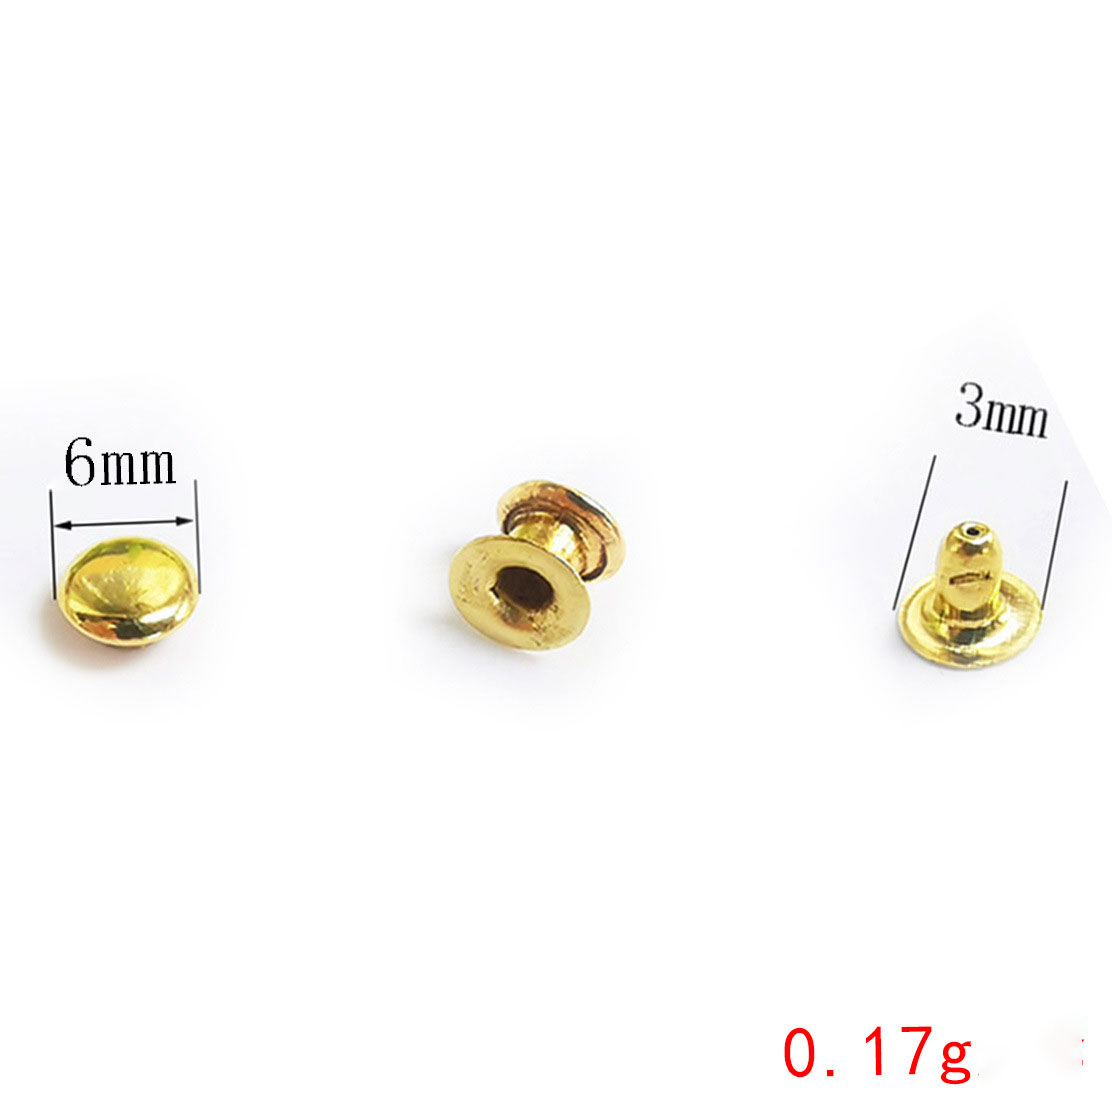 15:6mm gold